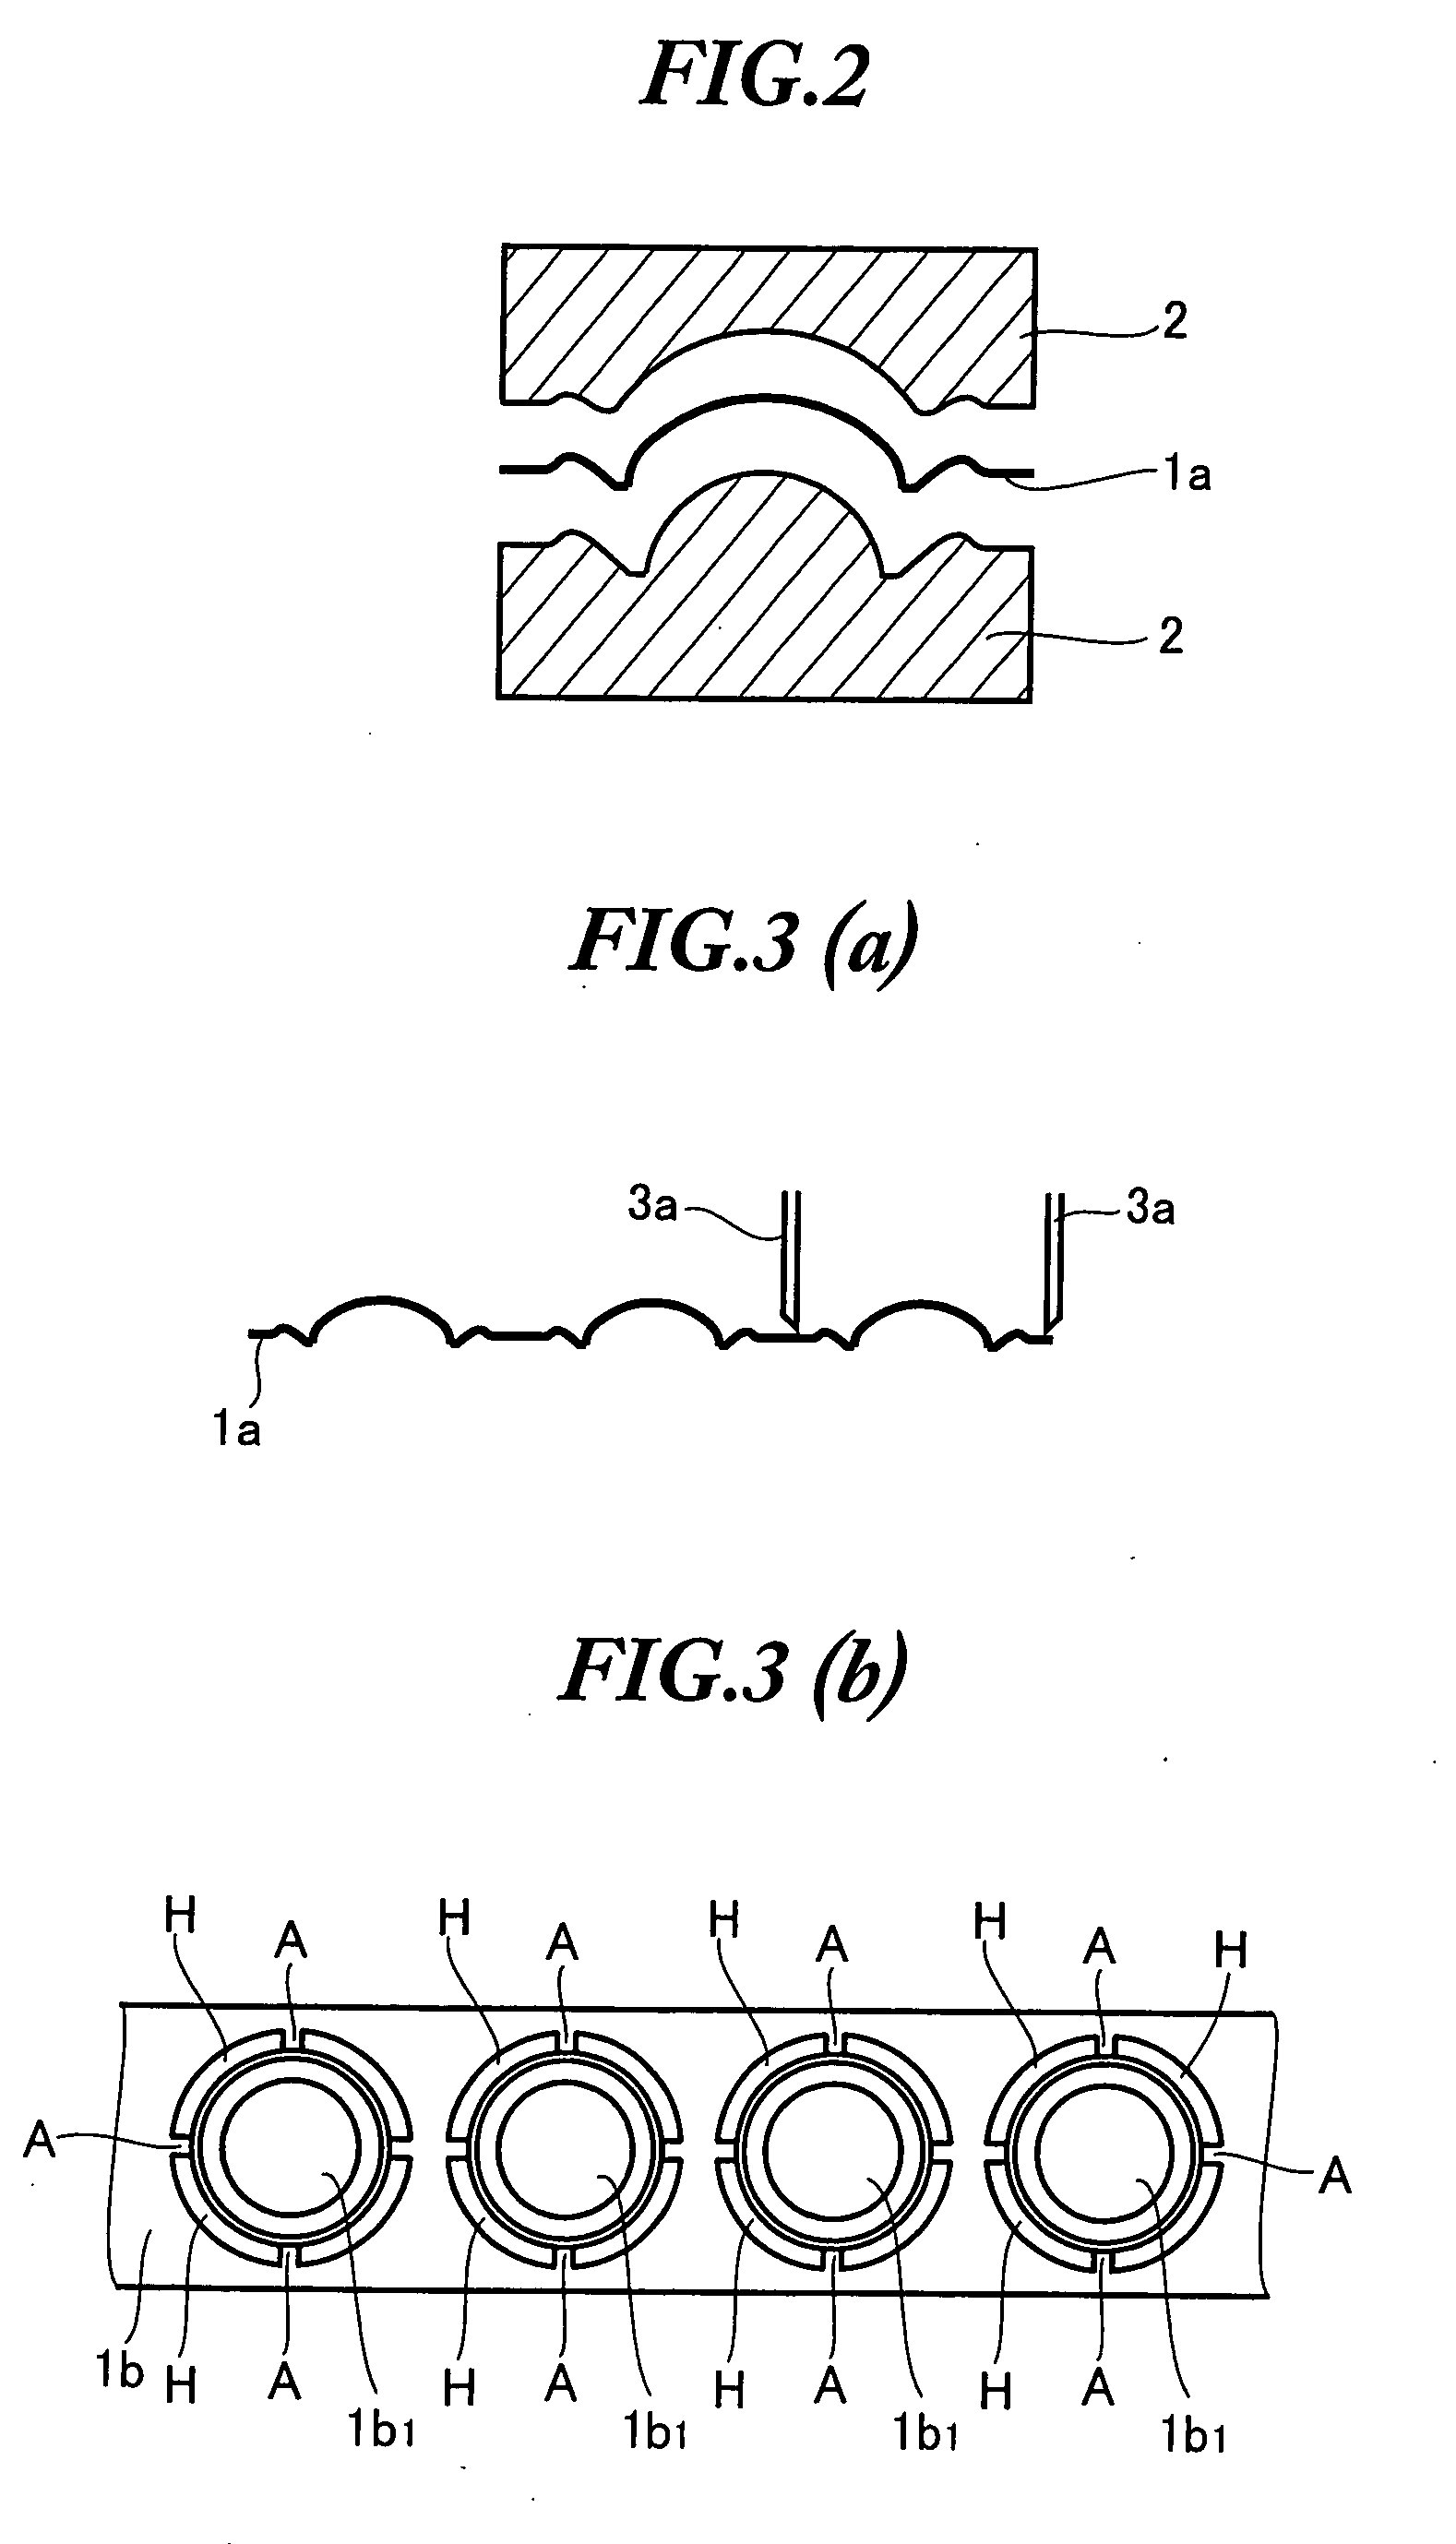 Speaker diaphragm and method of fabricating the same